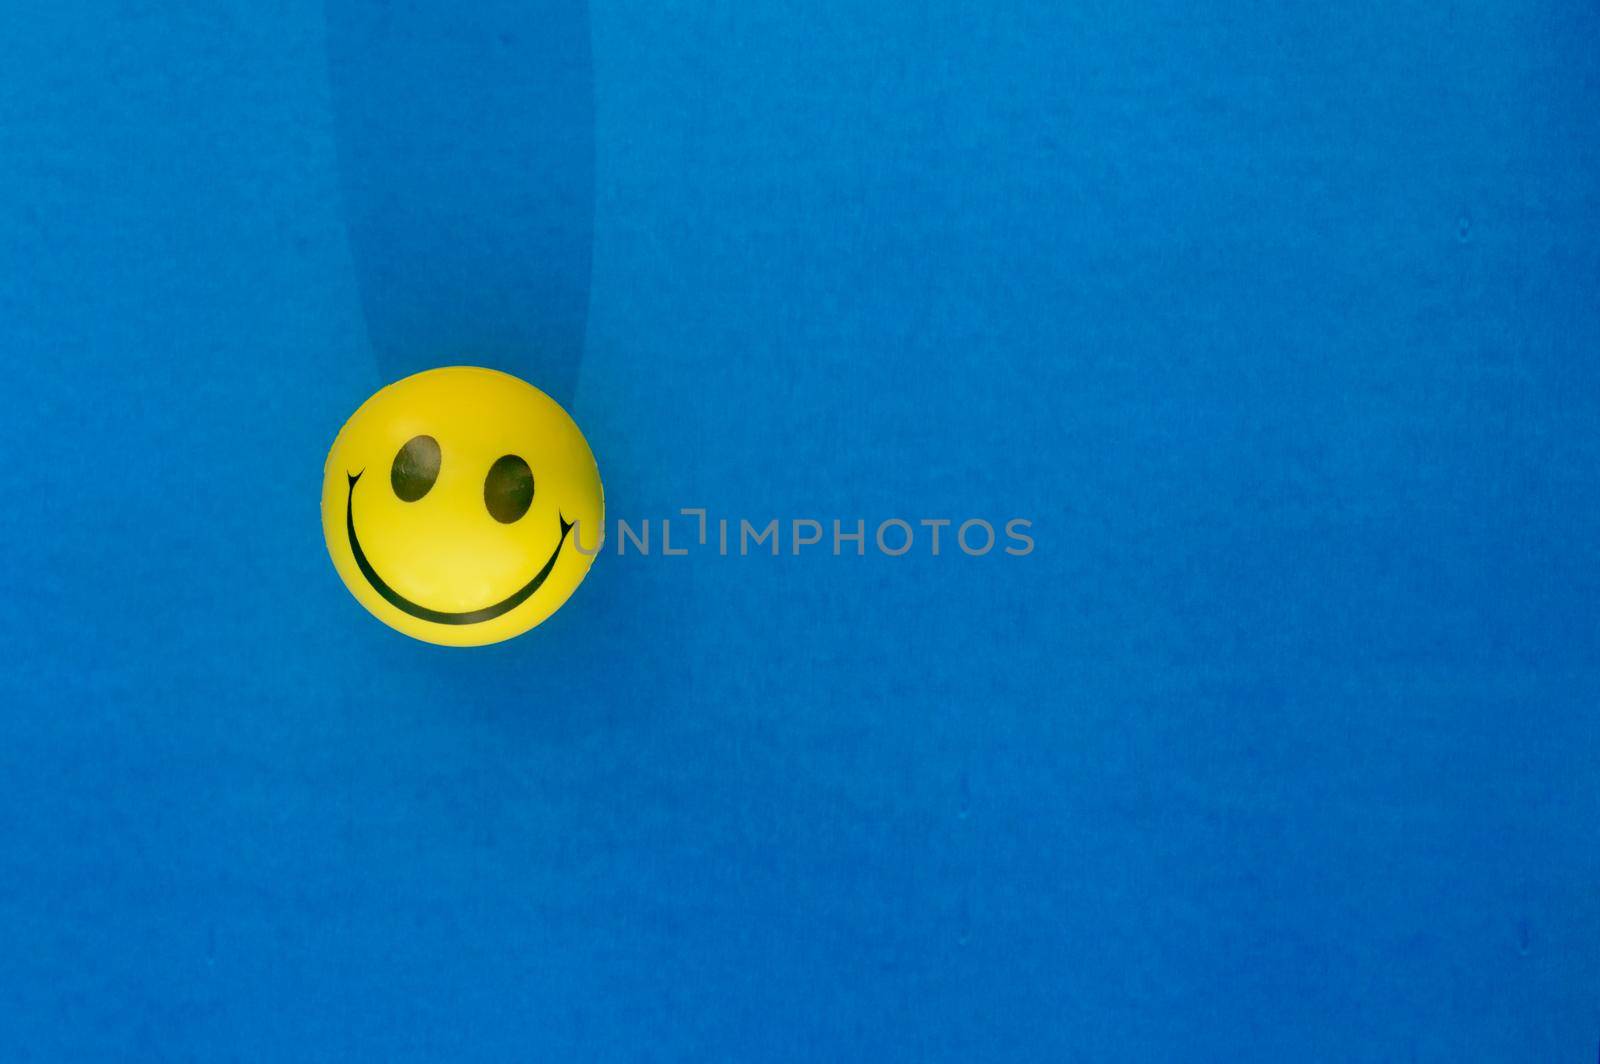 Anthropomorphic smiley face expression of a Squeeze Ball or Stress Ball isolated on blue background. Table top view. Close up. Happy smile background concept. by sudiptabhowmick